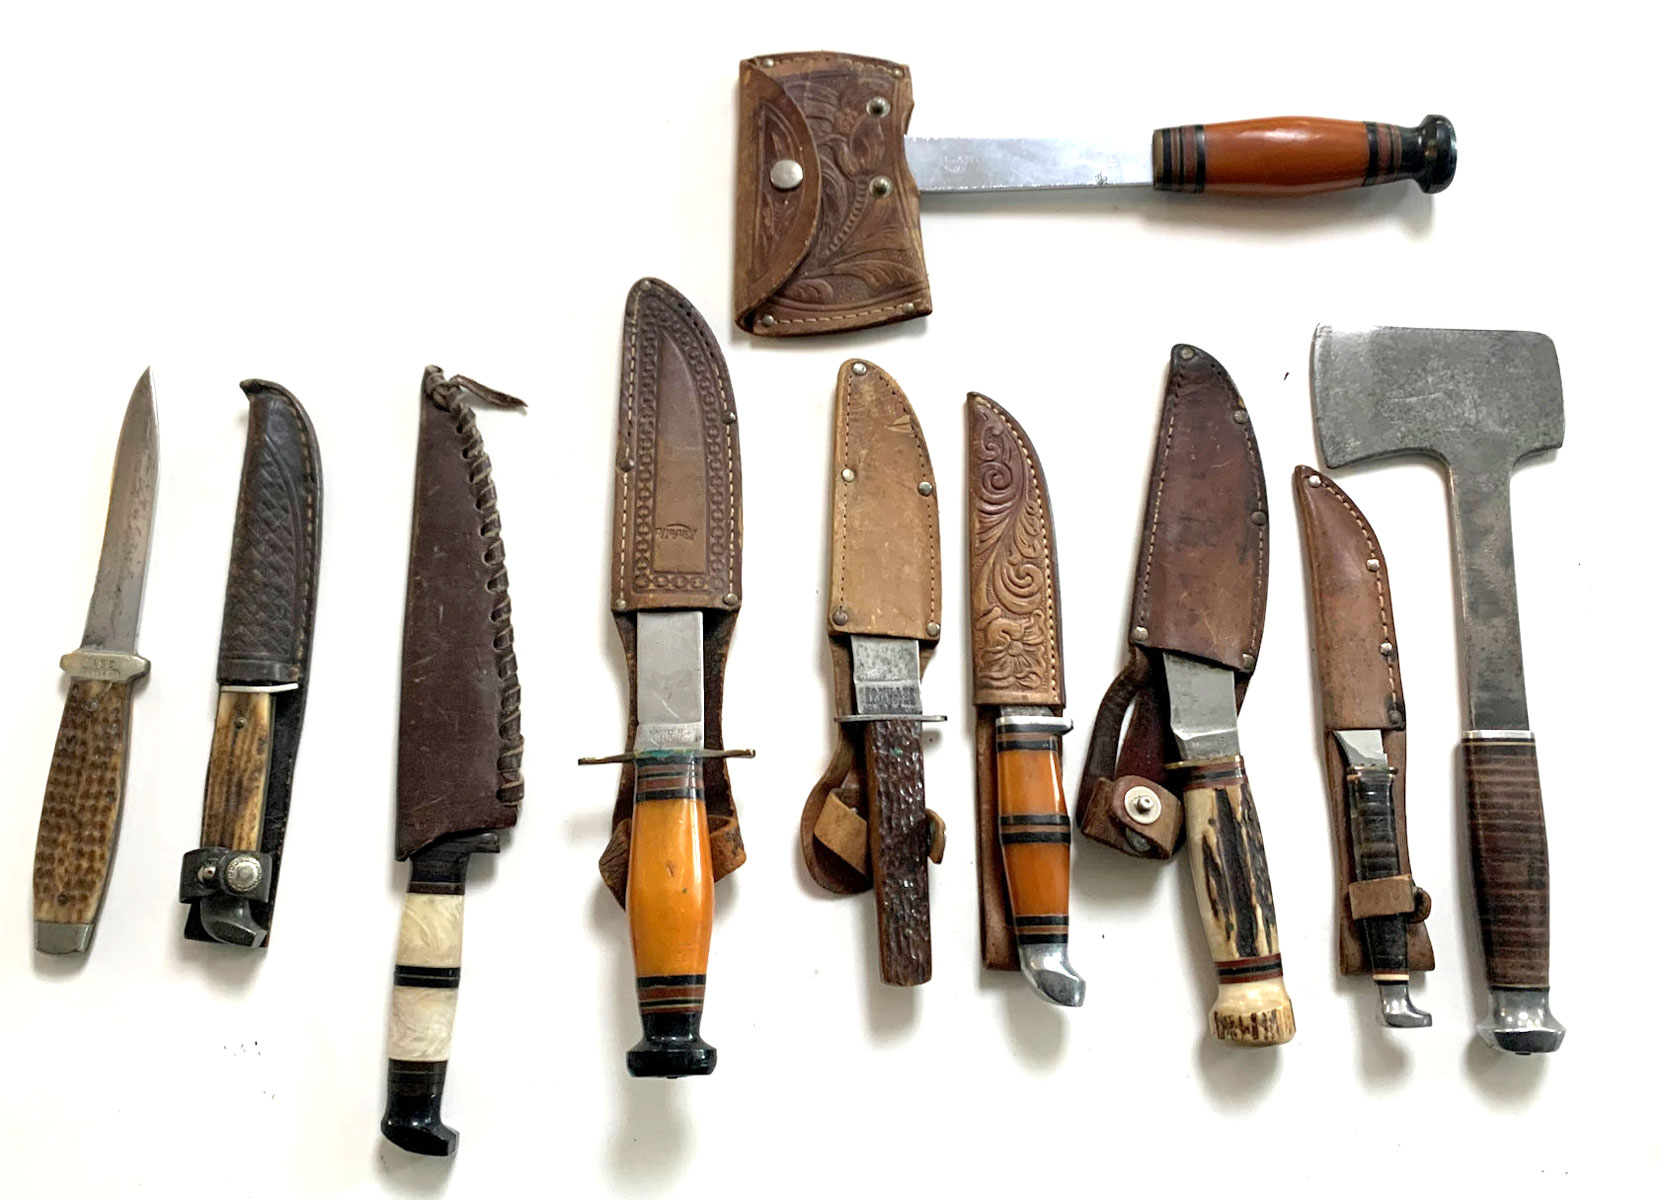 10 WEAPONS KNIVES HATCHETS: Identifiable